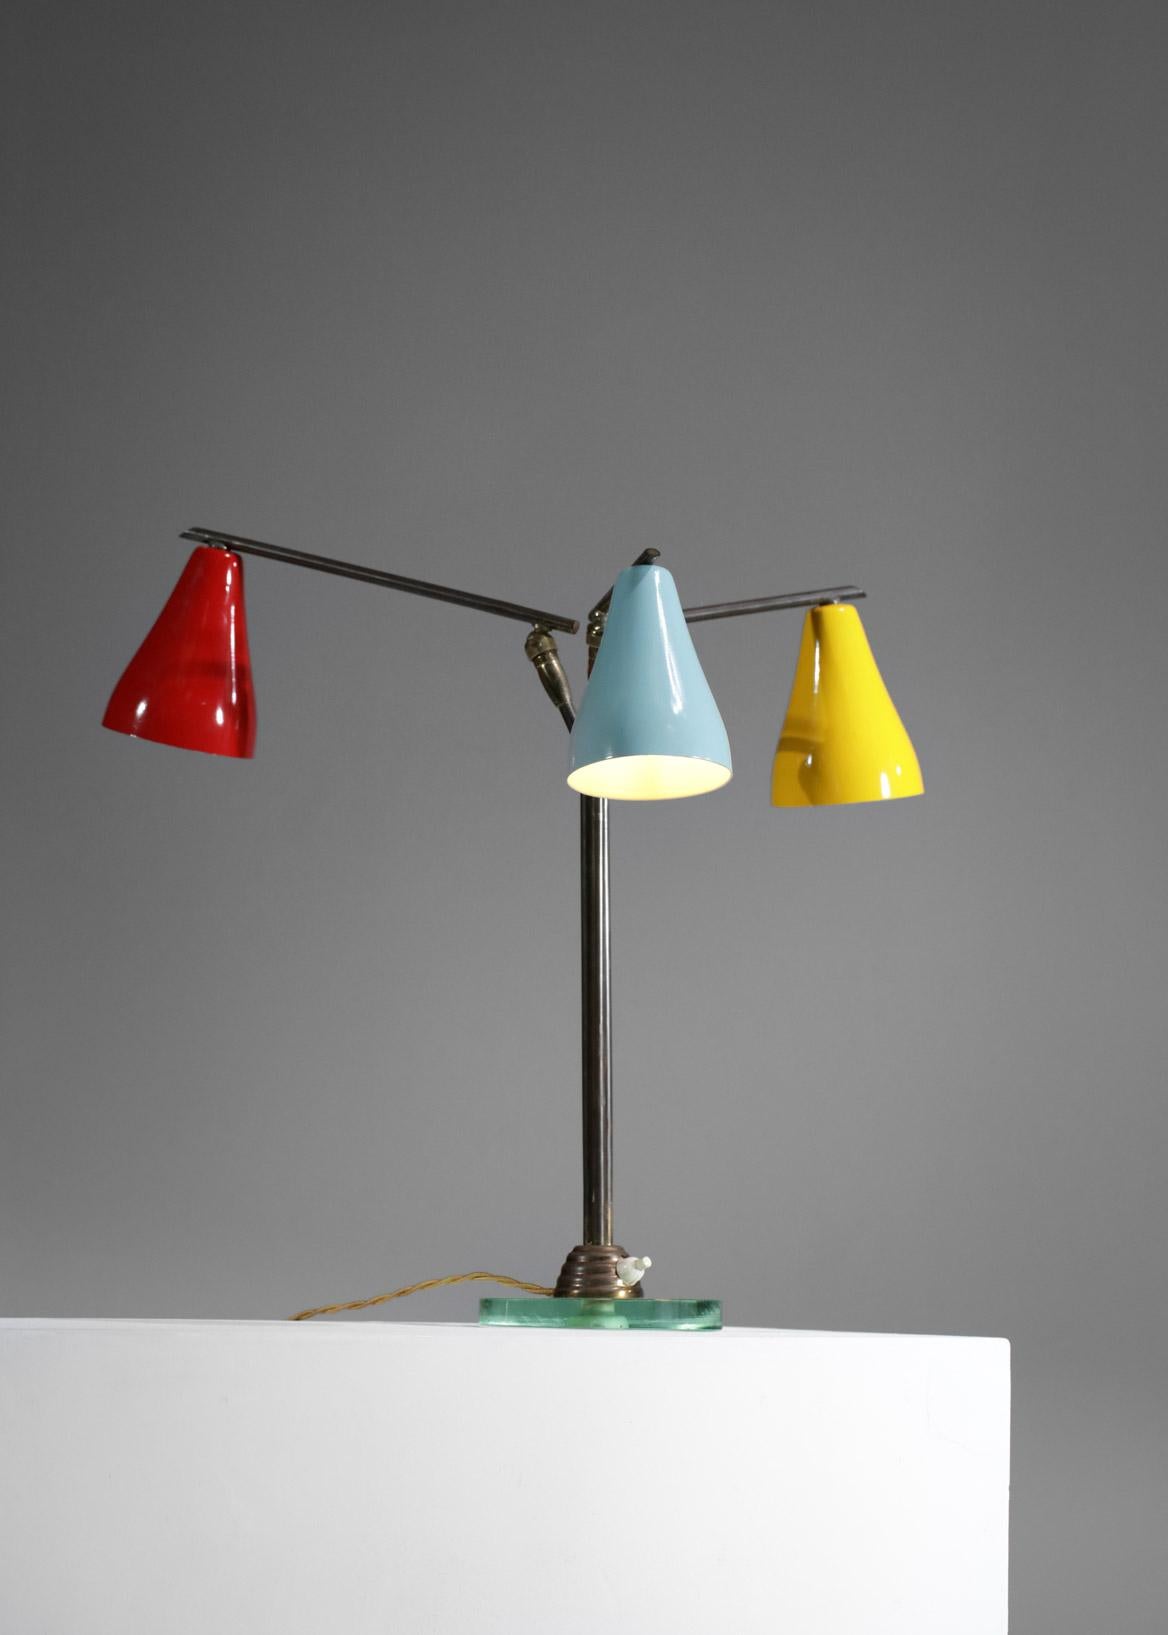 Italian desk or bedside lamp from the 1960s attributed to Fontana Arte. Asymmetrical structure with three solid brass arms, glass base and red, yellow and blue lacquered metal shade (length of the arms red 25 cm, yellow 20 cm, blue 15 cm). Excellent